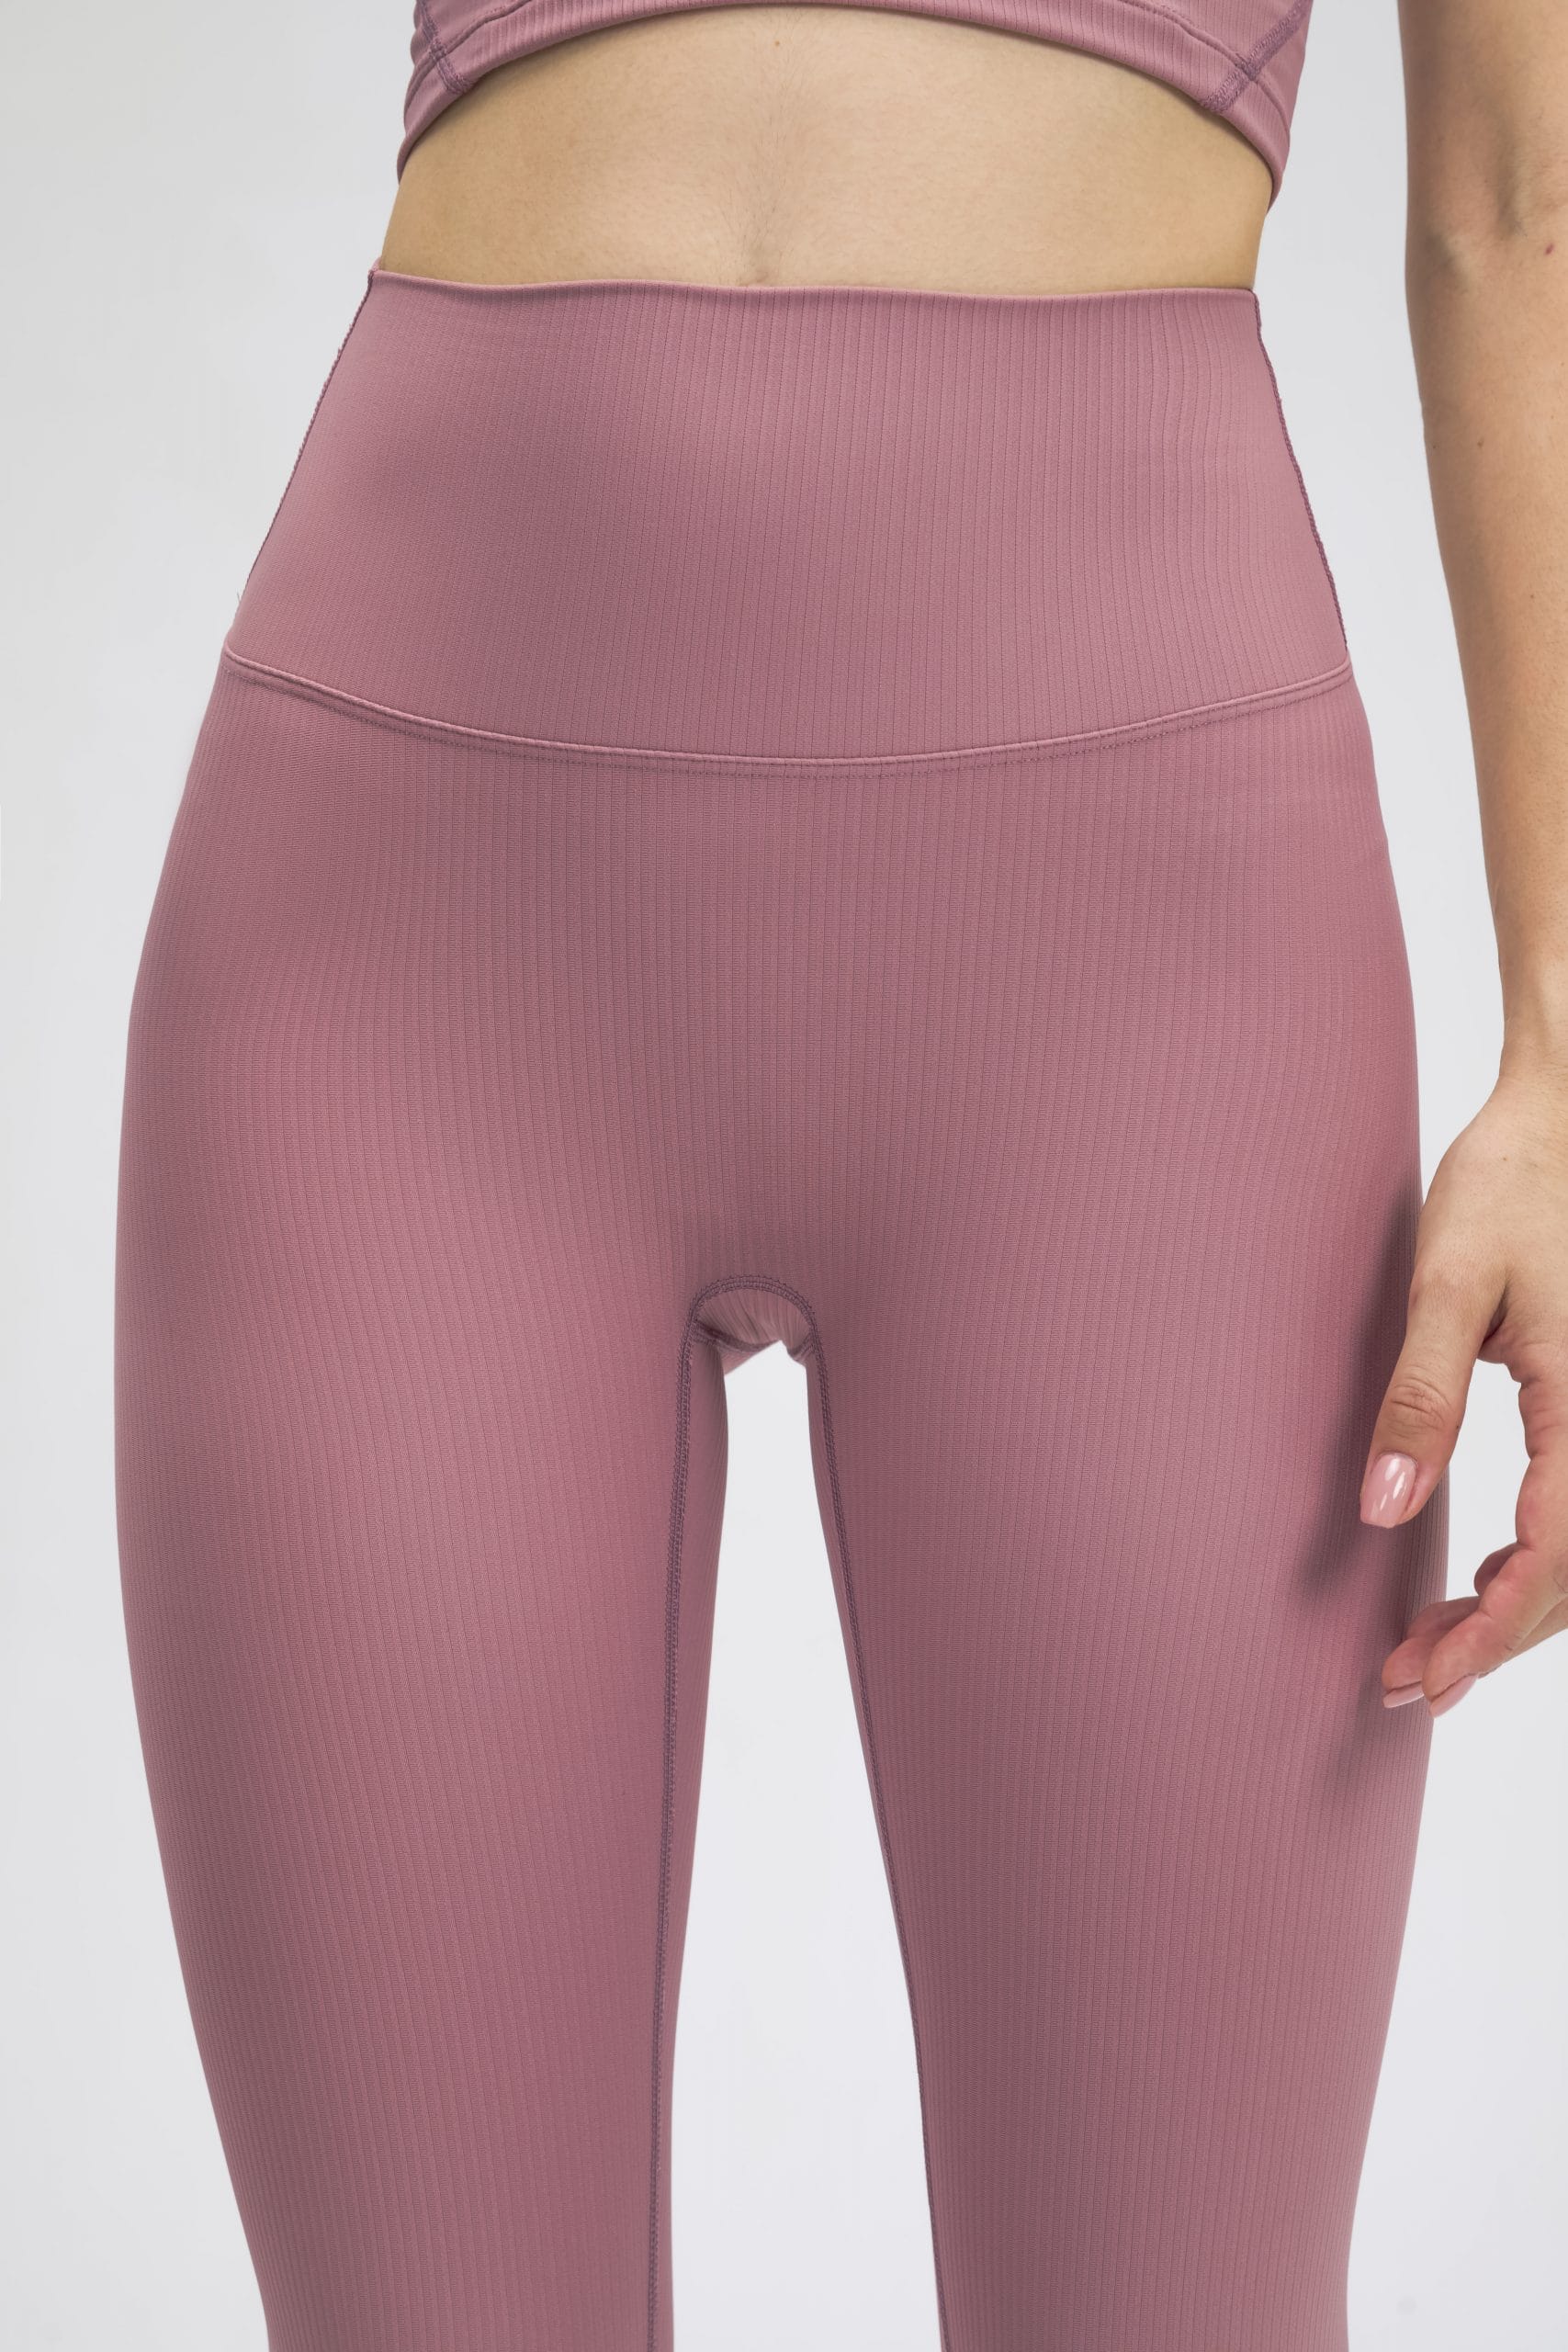 girls tight yoga pants, girls tight yoga pants Suppliers and